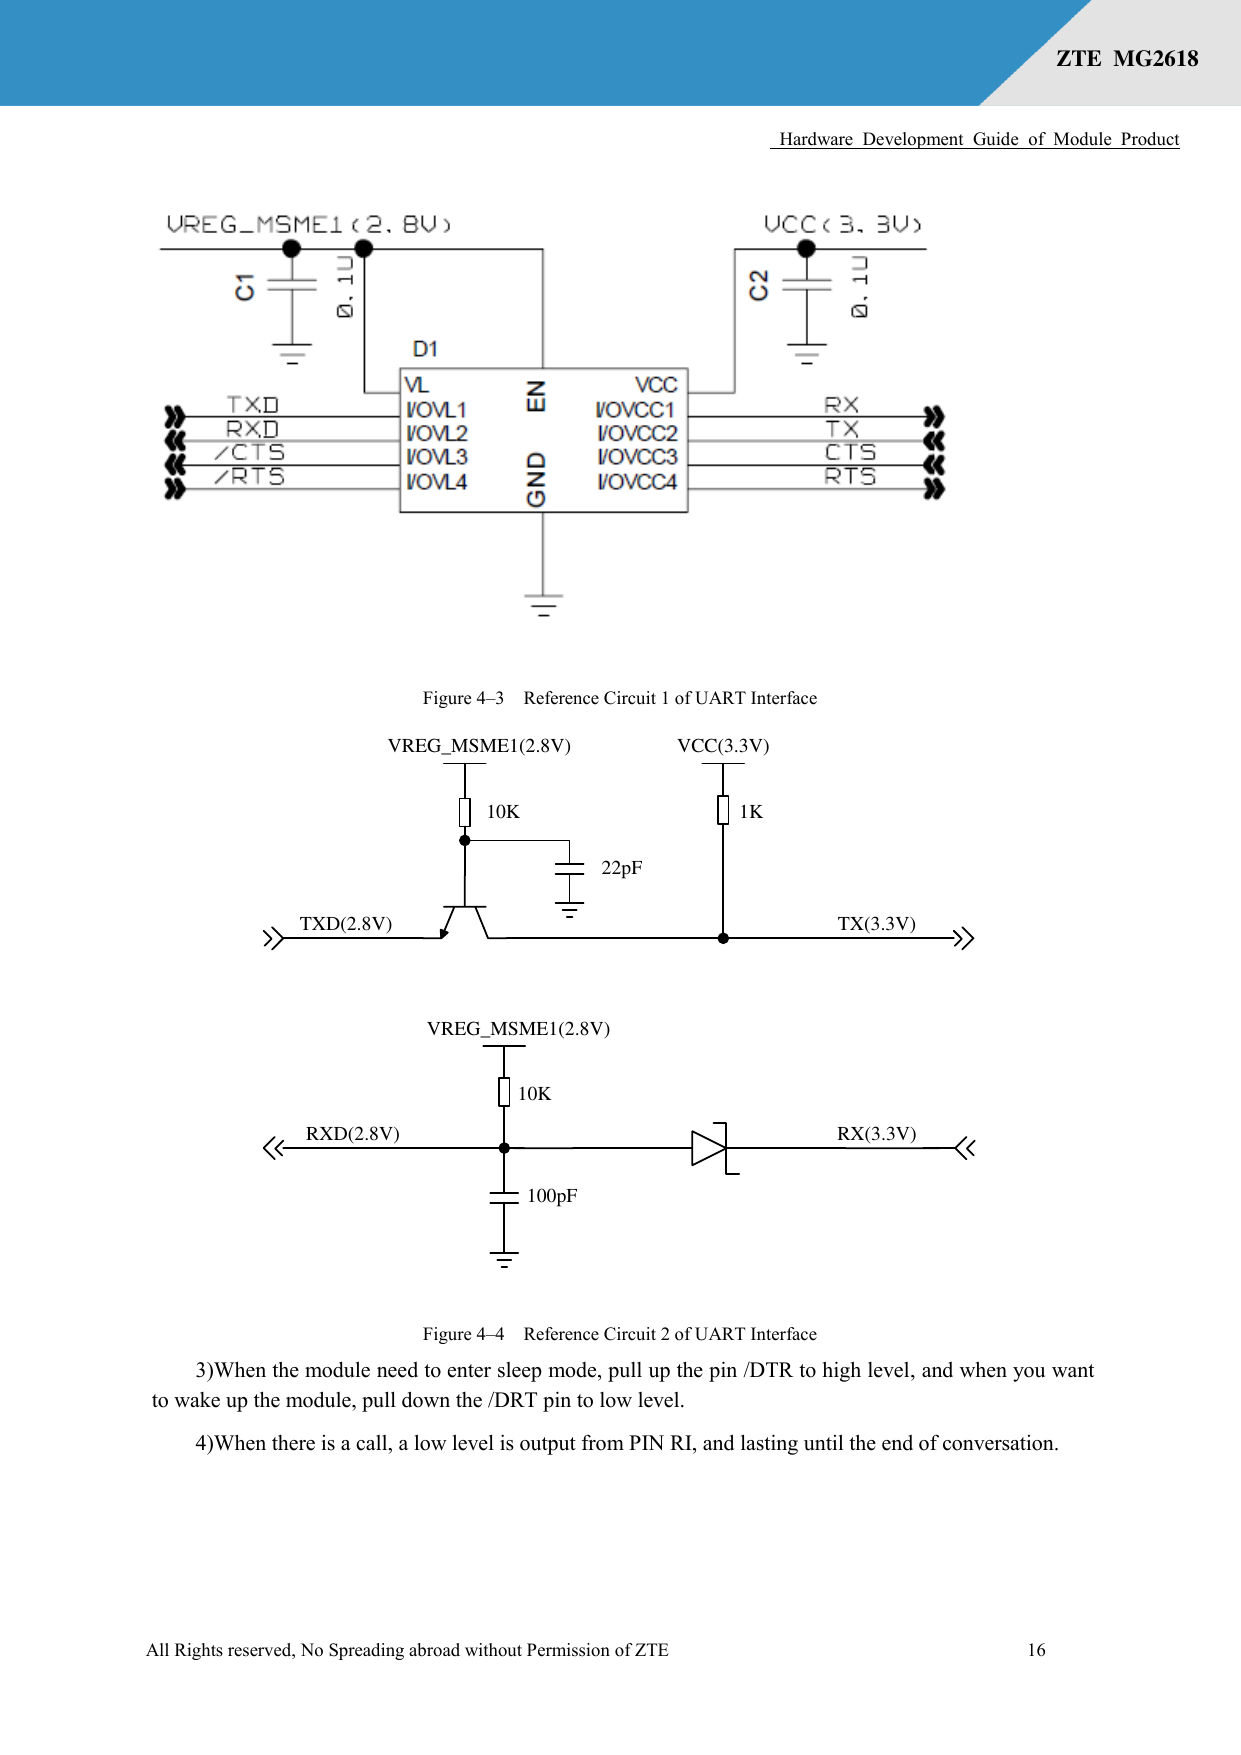      Hardware  Development  Guide  of  Module  Product  All Rights reserved, No Spreading abroad without Permission of ZTE              16 ZTE  MG2618    Figure 4–3  Reference Circuit 1 of UART Interface VREG_MSME1(2.8V)TXD(2.8V)10K 1KVCC(3.3V)TX(3.3V)22pF10KRX(3.3V)100pFRXD(2.8V)VREG_MSME1(2.8V) Figure 4–4  Reference Circuit 2 of UART Interface 3)When the module need to enter sleep mode, pull up the pin /DTR to high level, and when you want to wake up the module, pull down the /DRT pin to low level. 4)When there is a call, a low level is output from PIN RI, and lasting until the end of conversation.  